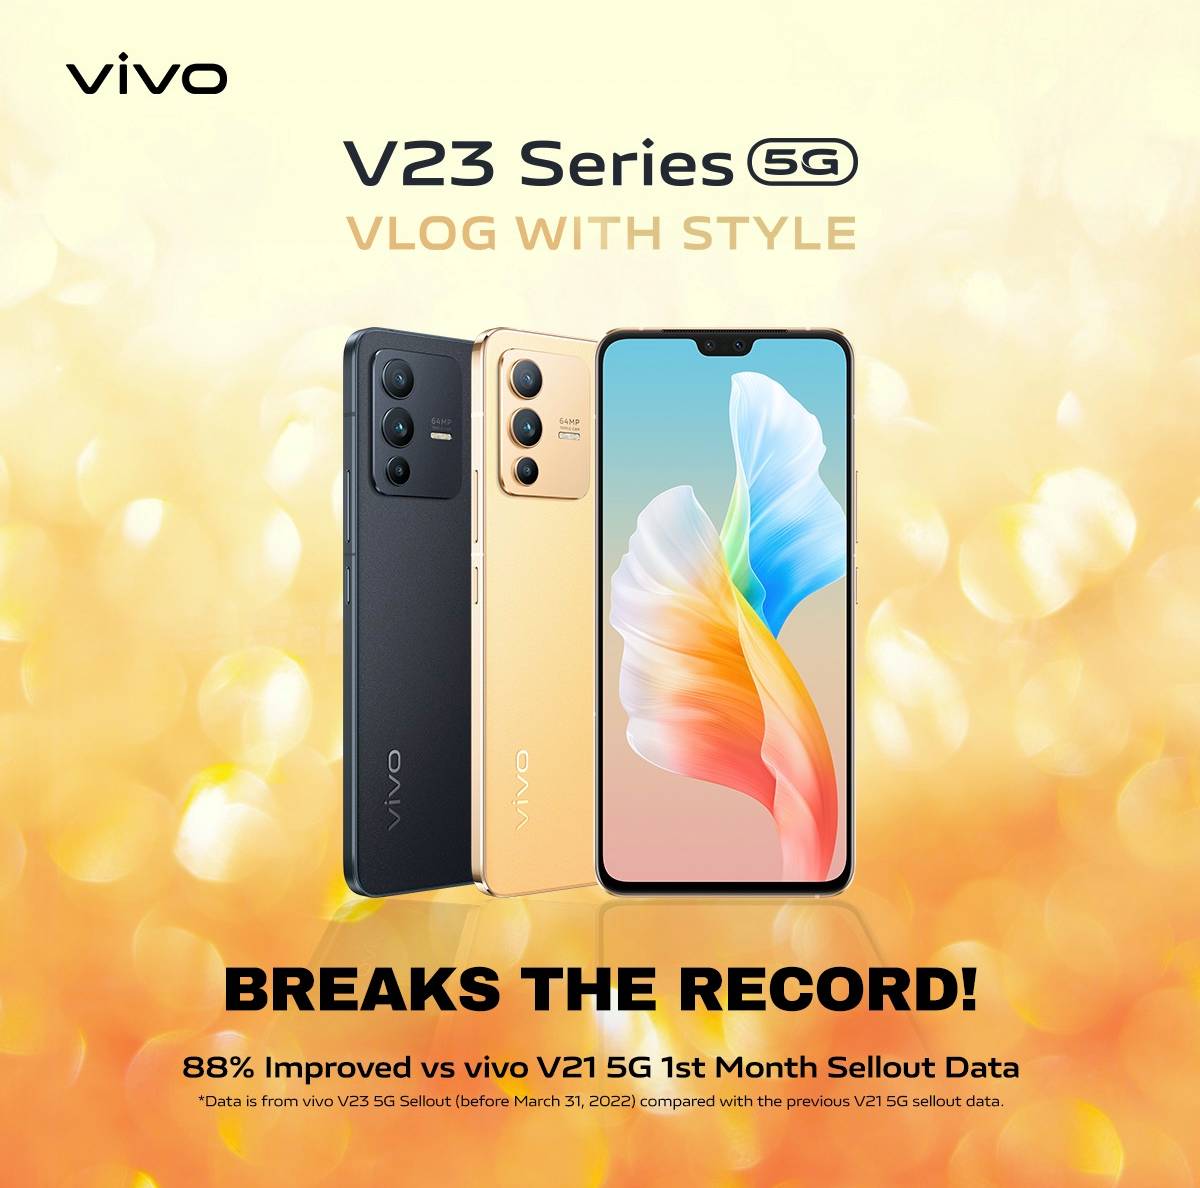 Record breaking performance achieves 88% sellout data. Photo source: vivo